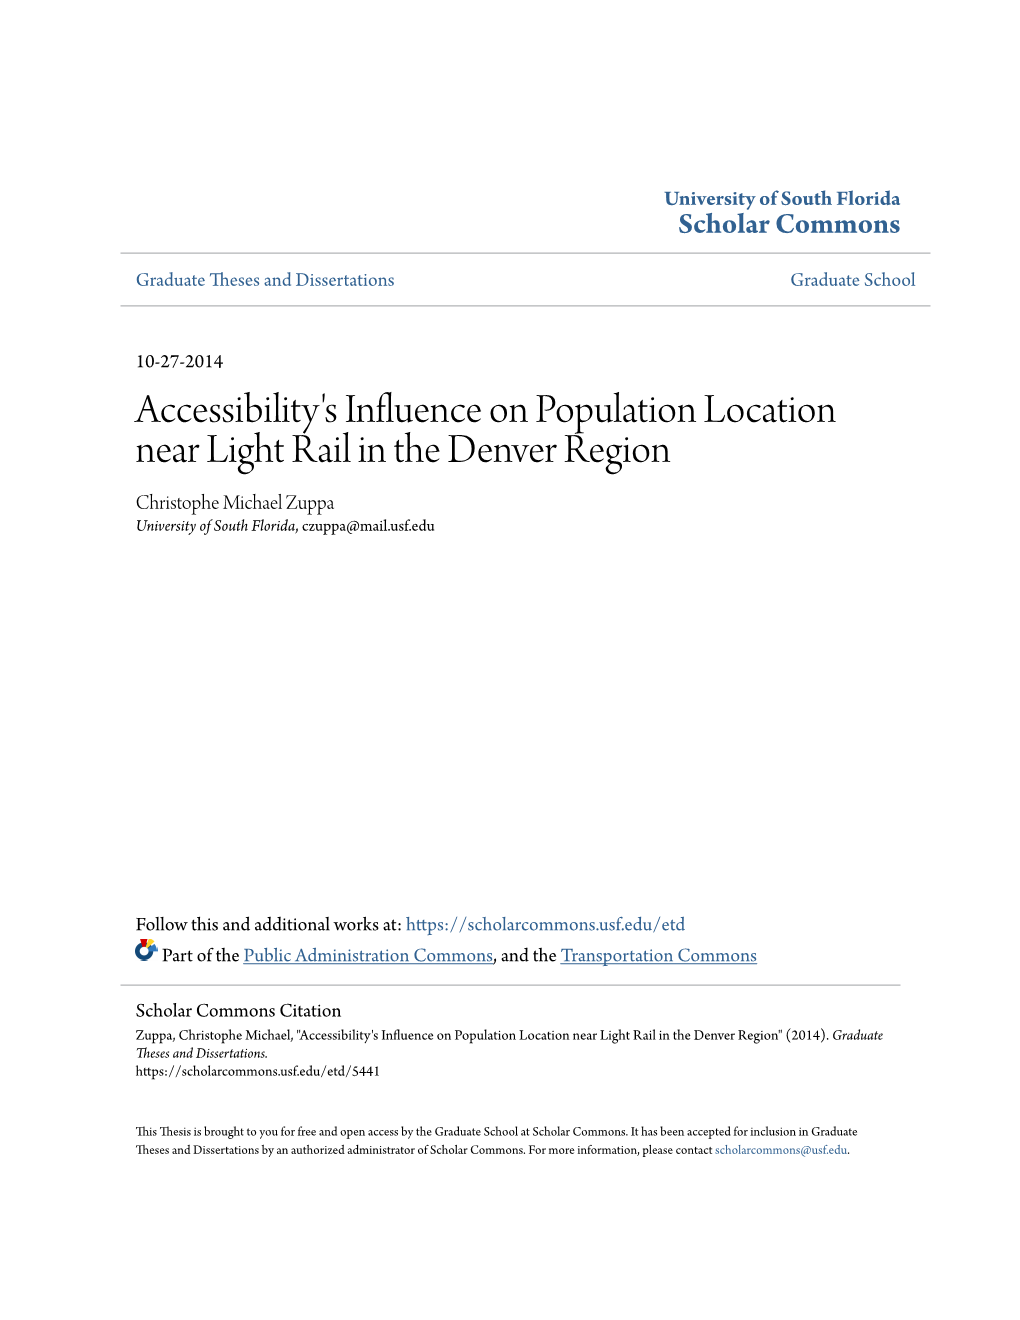 Accessibility's Influence on Population Location Near Light Rail in the Denver Region Christophe Michael Zuppa University of South Florida, Czuppa@Mail.Usf.Edu